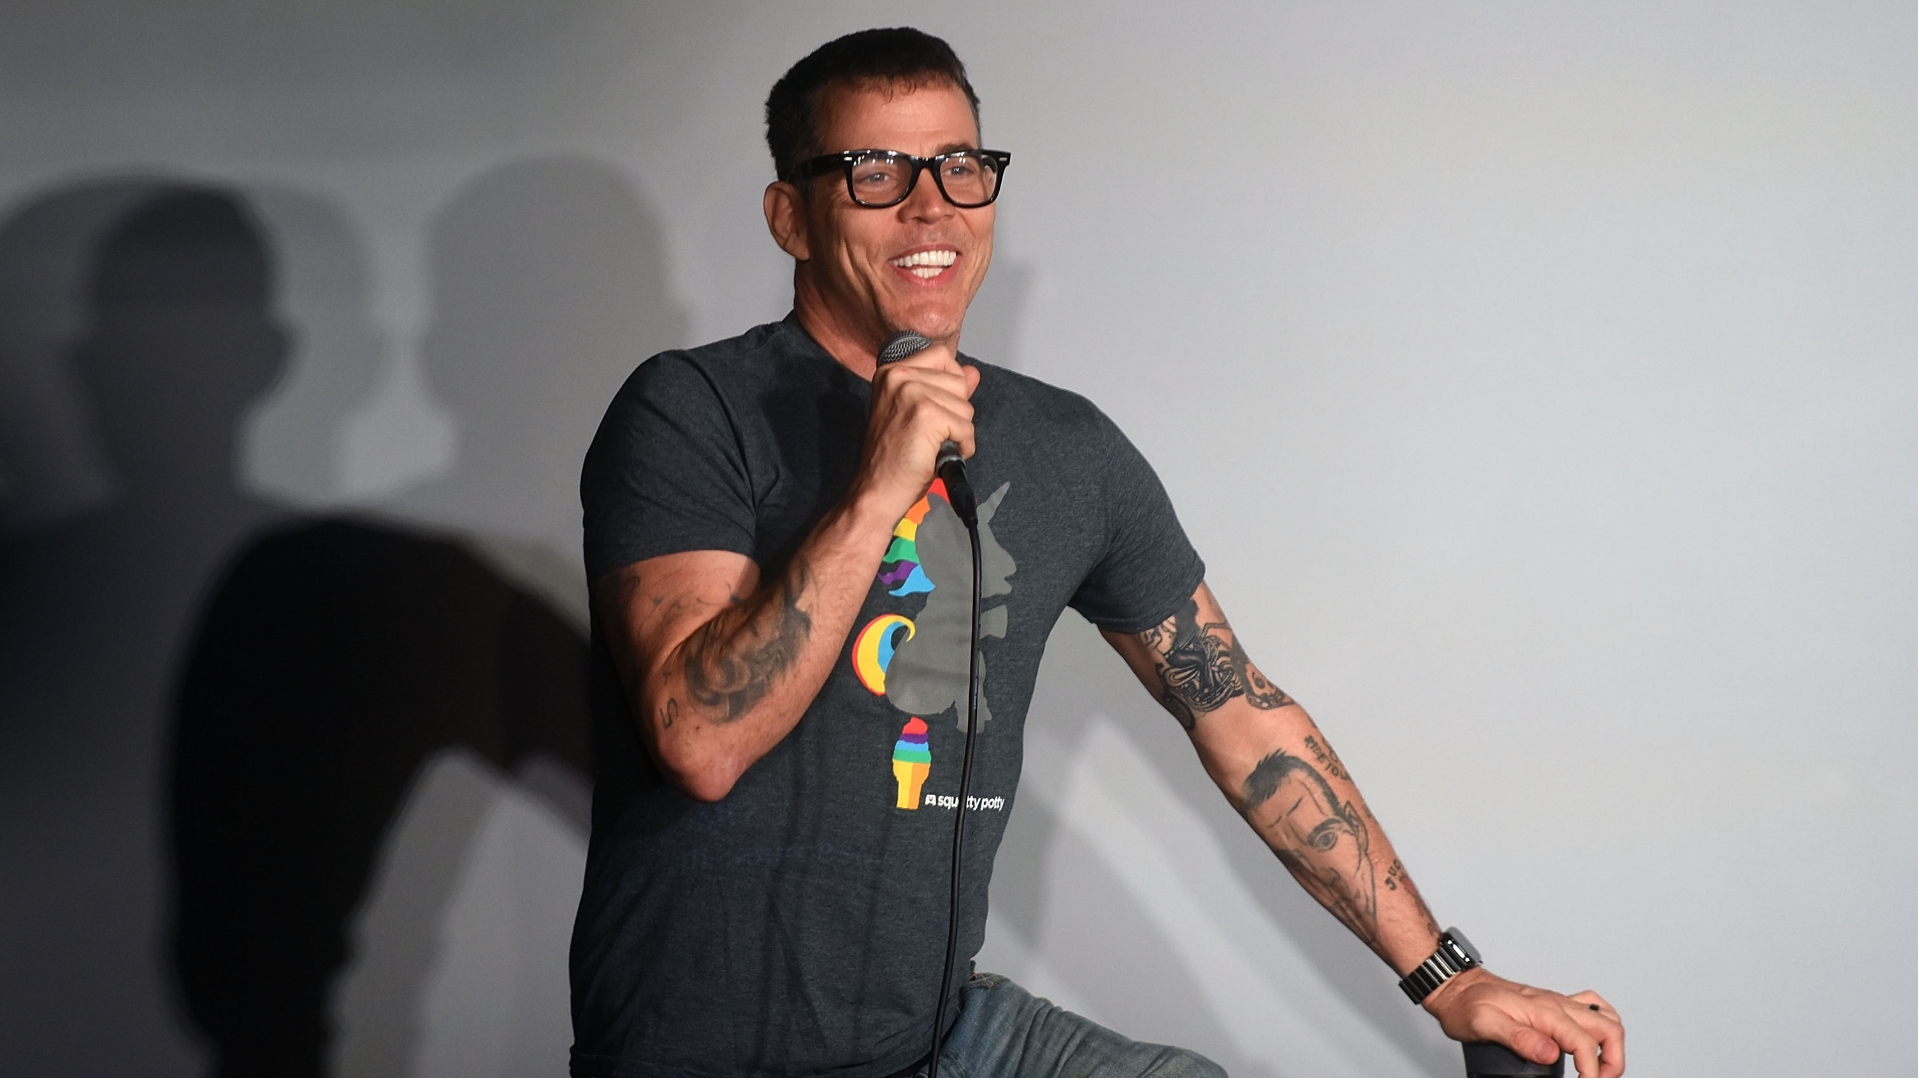 Steve-O says early years of Jackass were “legitimately a bad influence” on young viewers